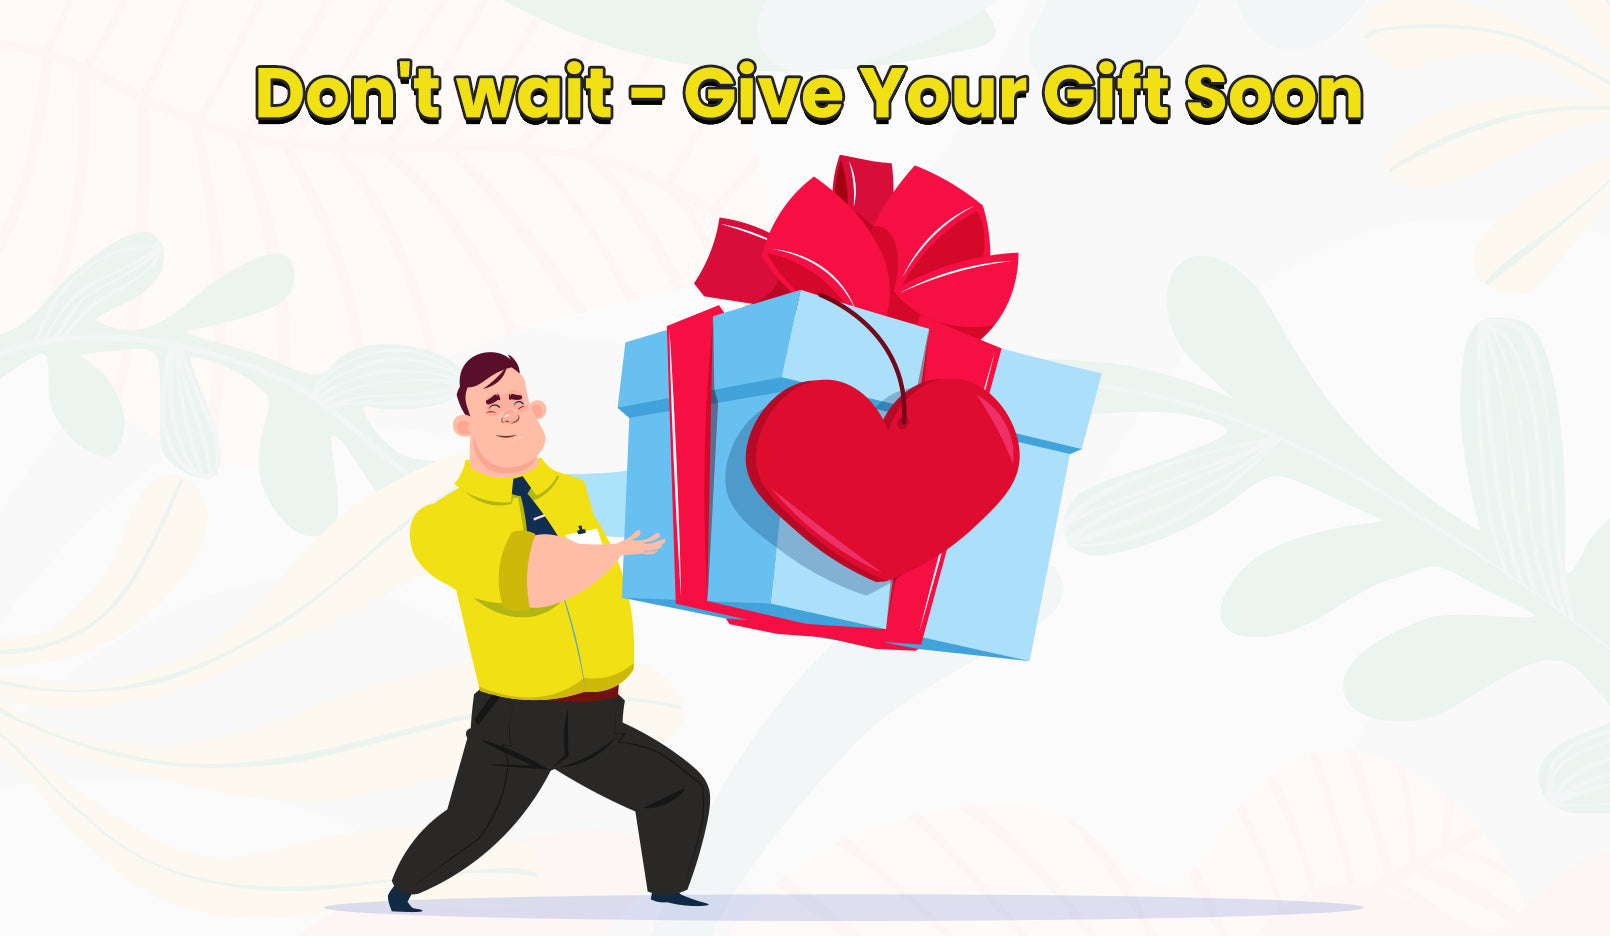 Don't wait - Give Your Gift Soon!